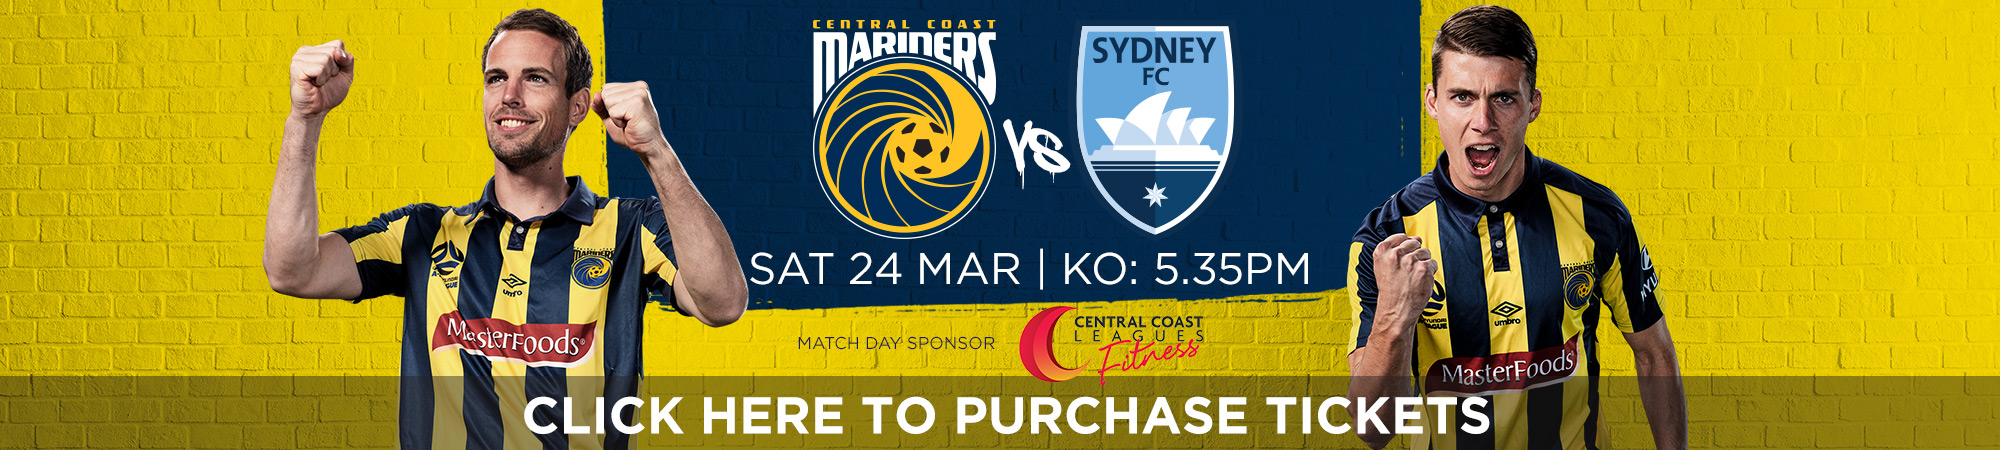 Central Coast Mariners v Sydney FC March 24 banner